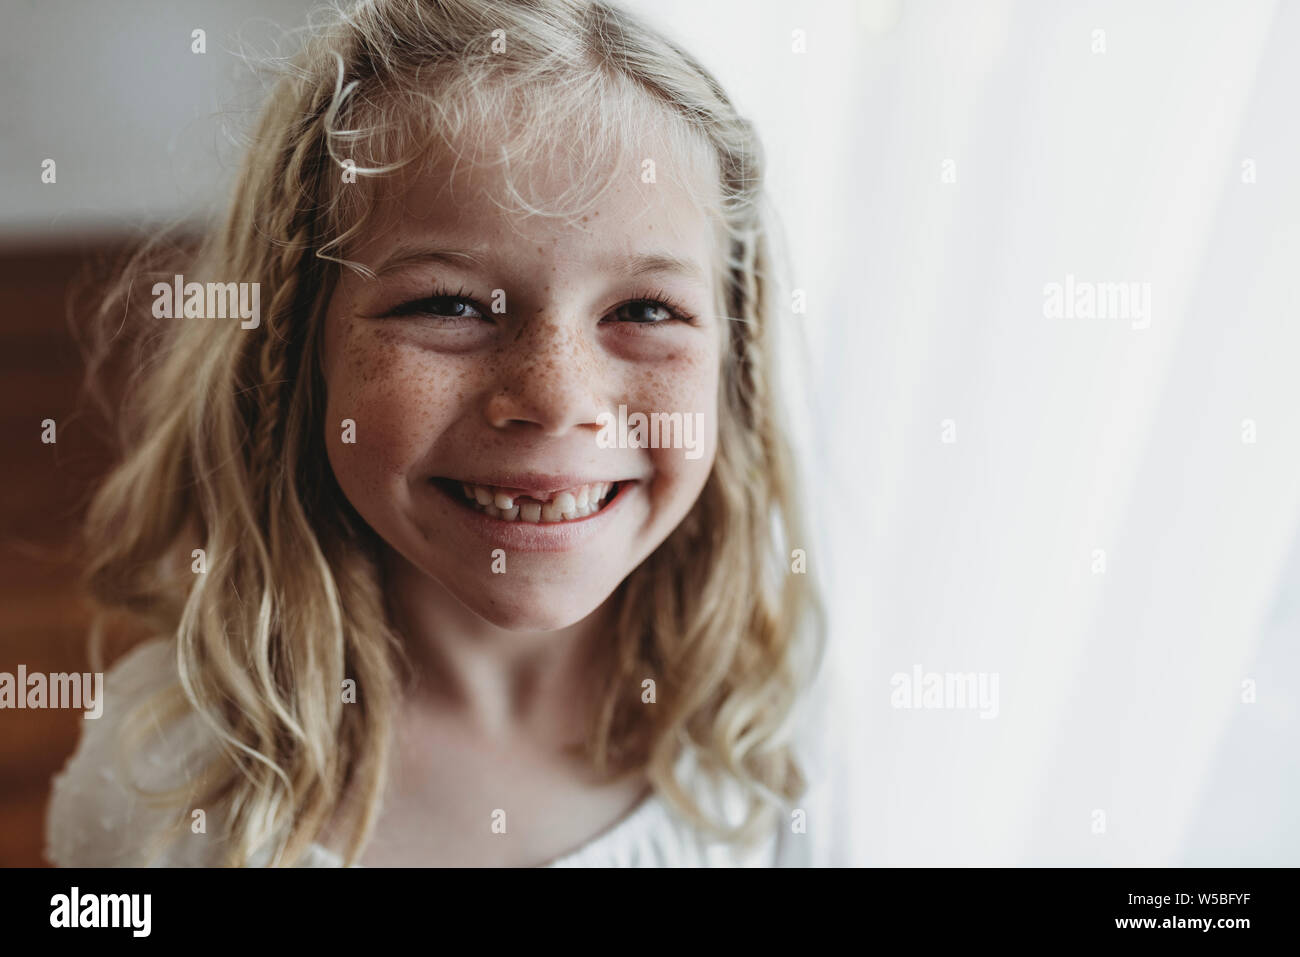 Portrait of young freckled smiling girl missing tooth Stock Photo